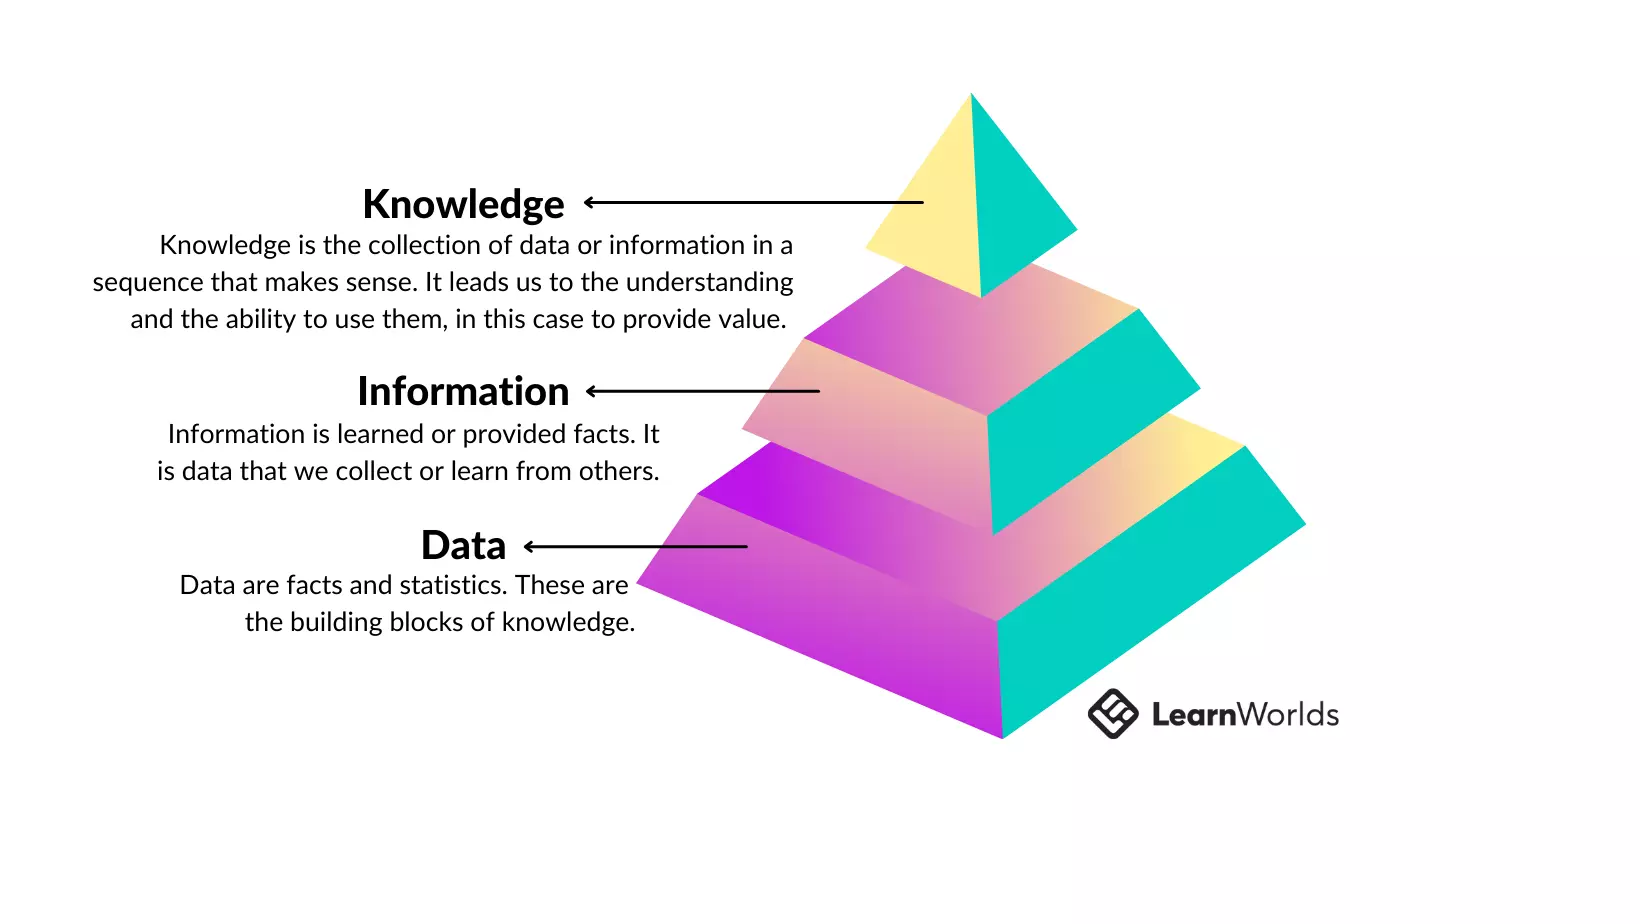 The pyramid of knowledge separating knowledge, information, and data.